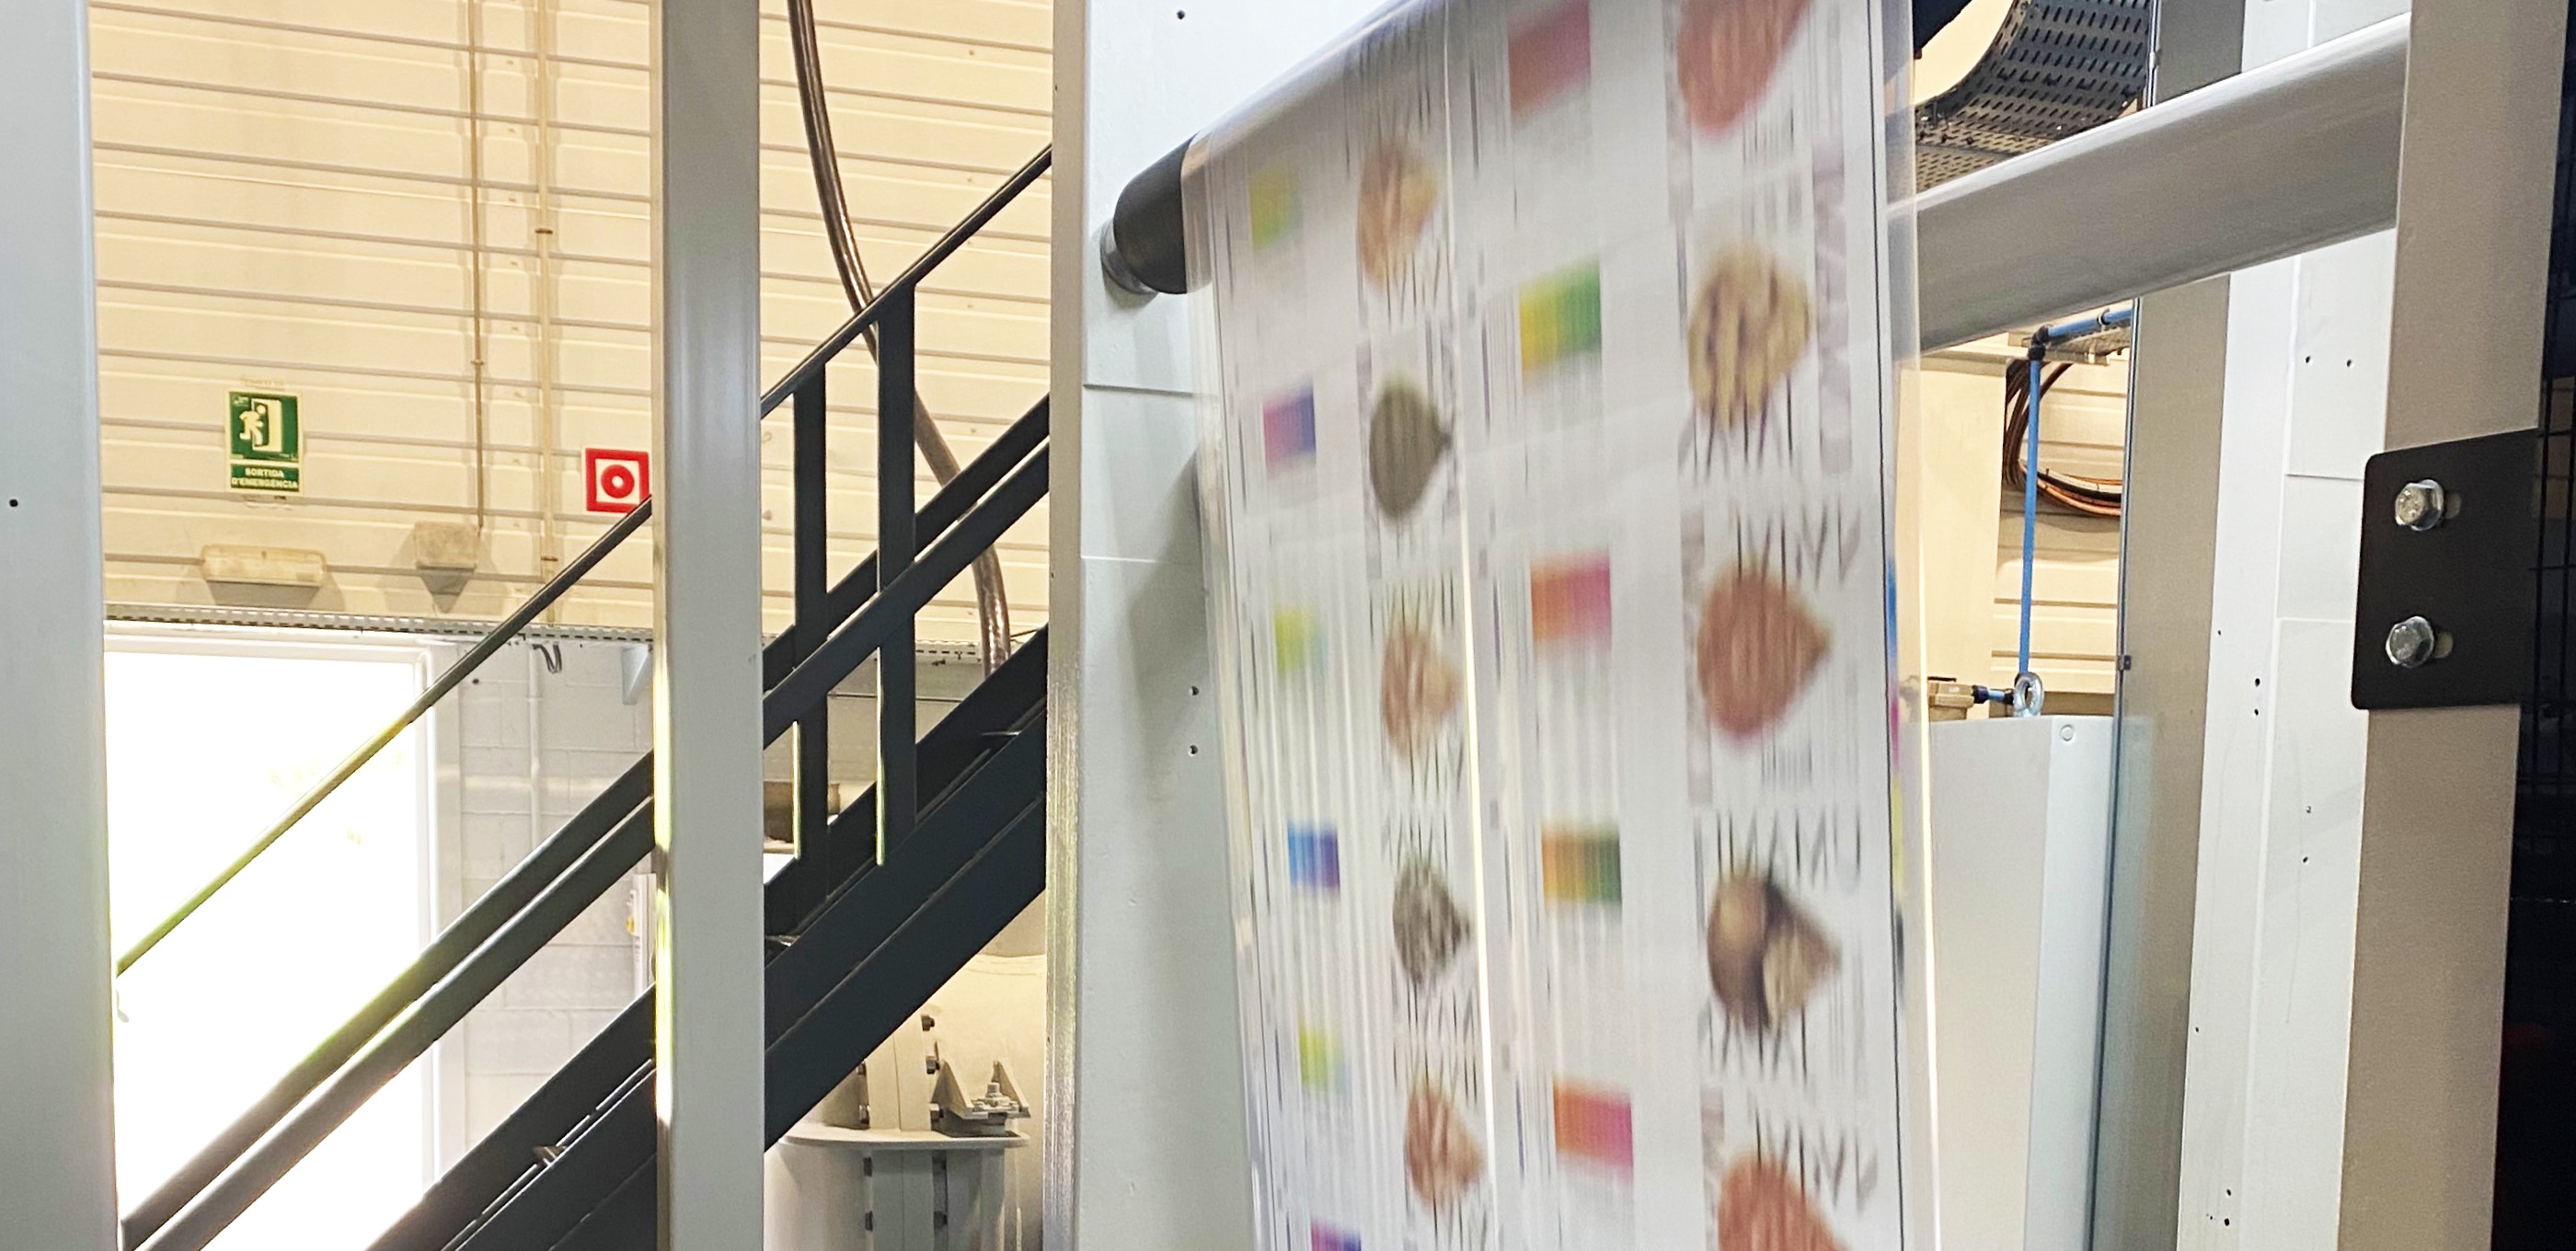 In cooperation with a European printing press manufacturer, we take on the challenge of flexographic printing of flexible packaging that has the potential to achieve a sustainable society